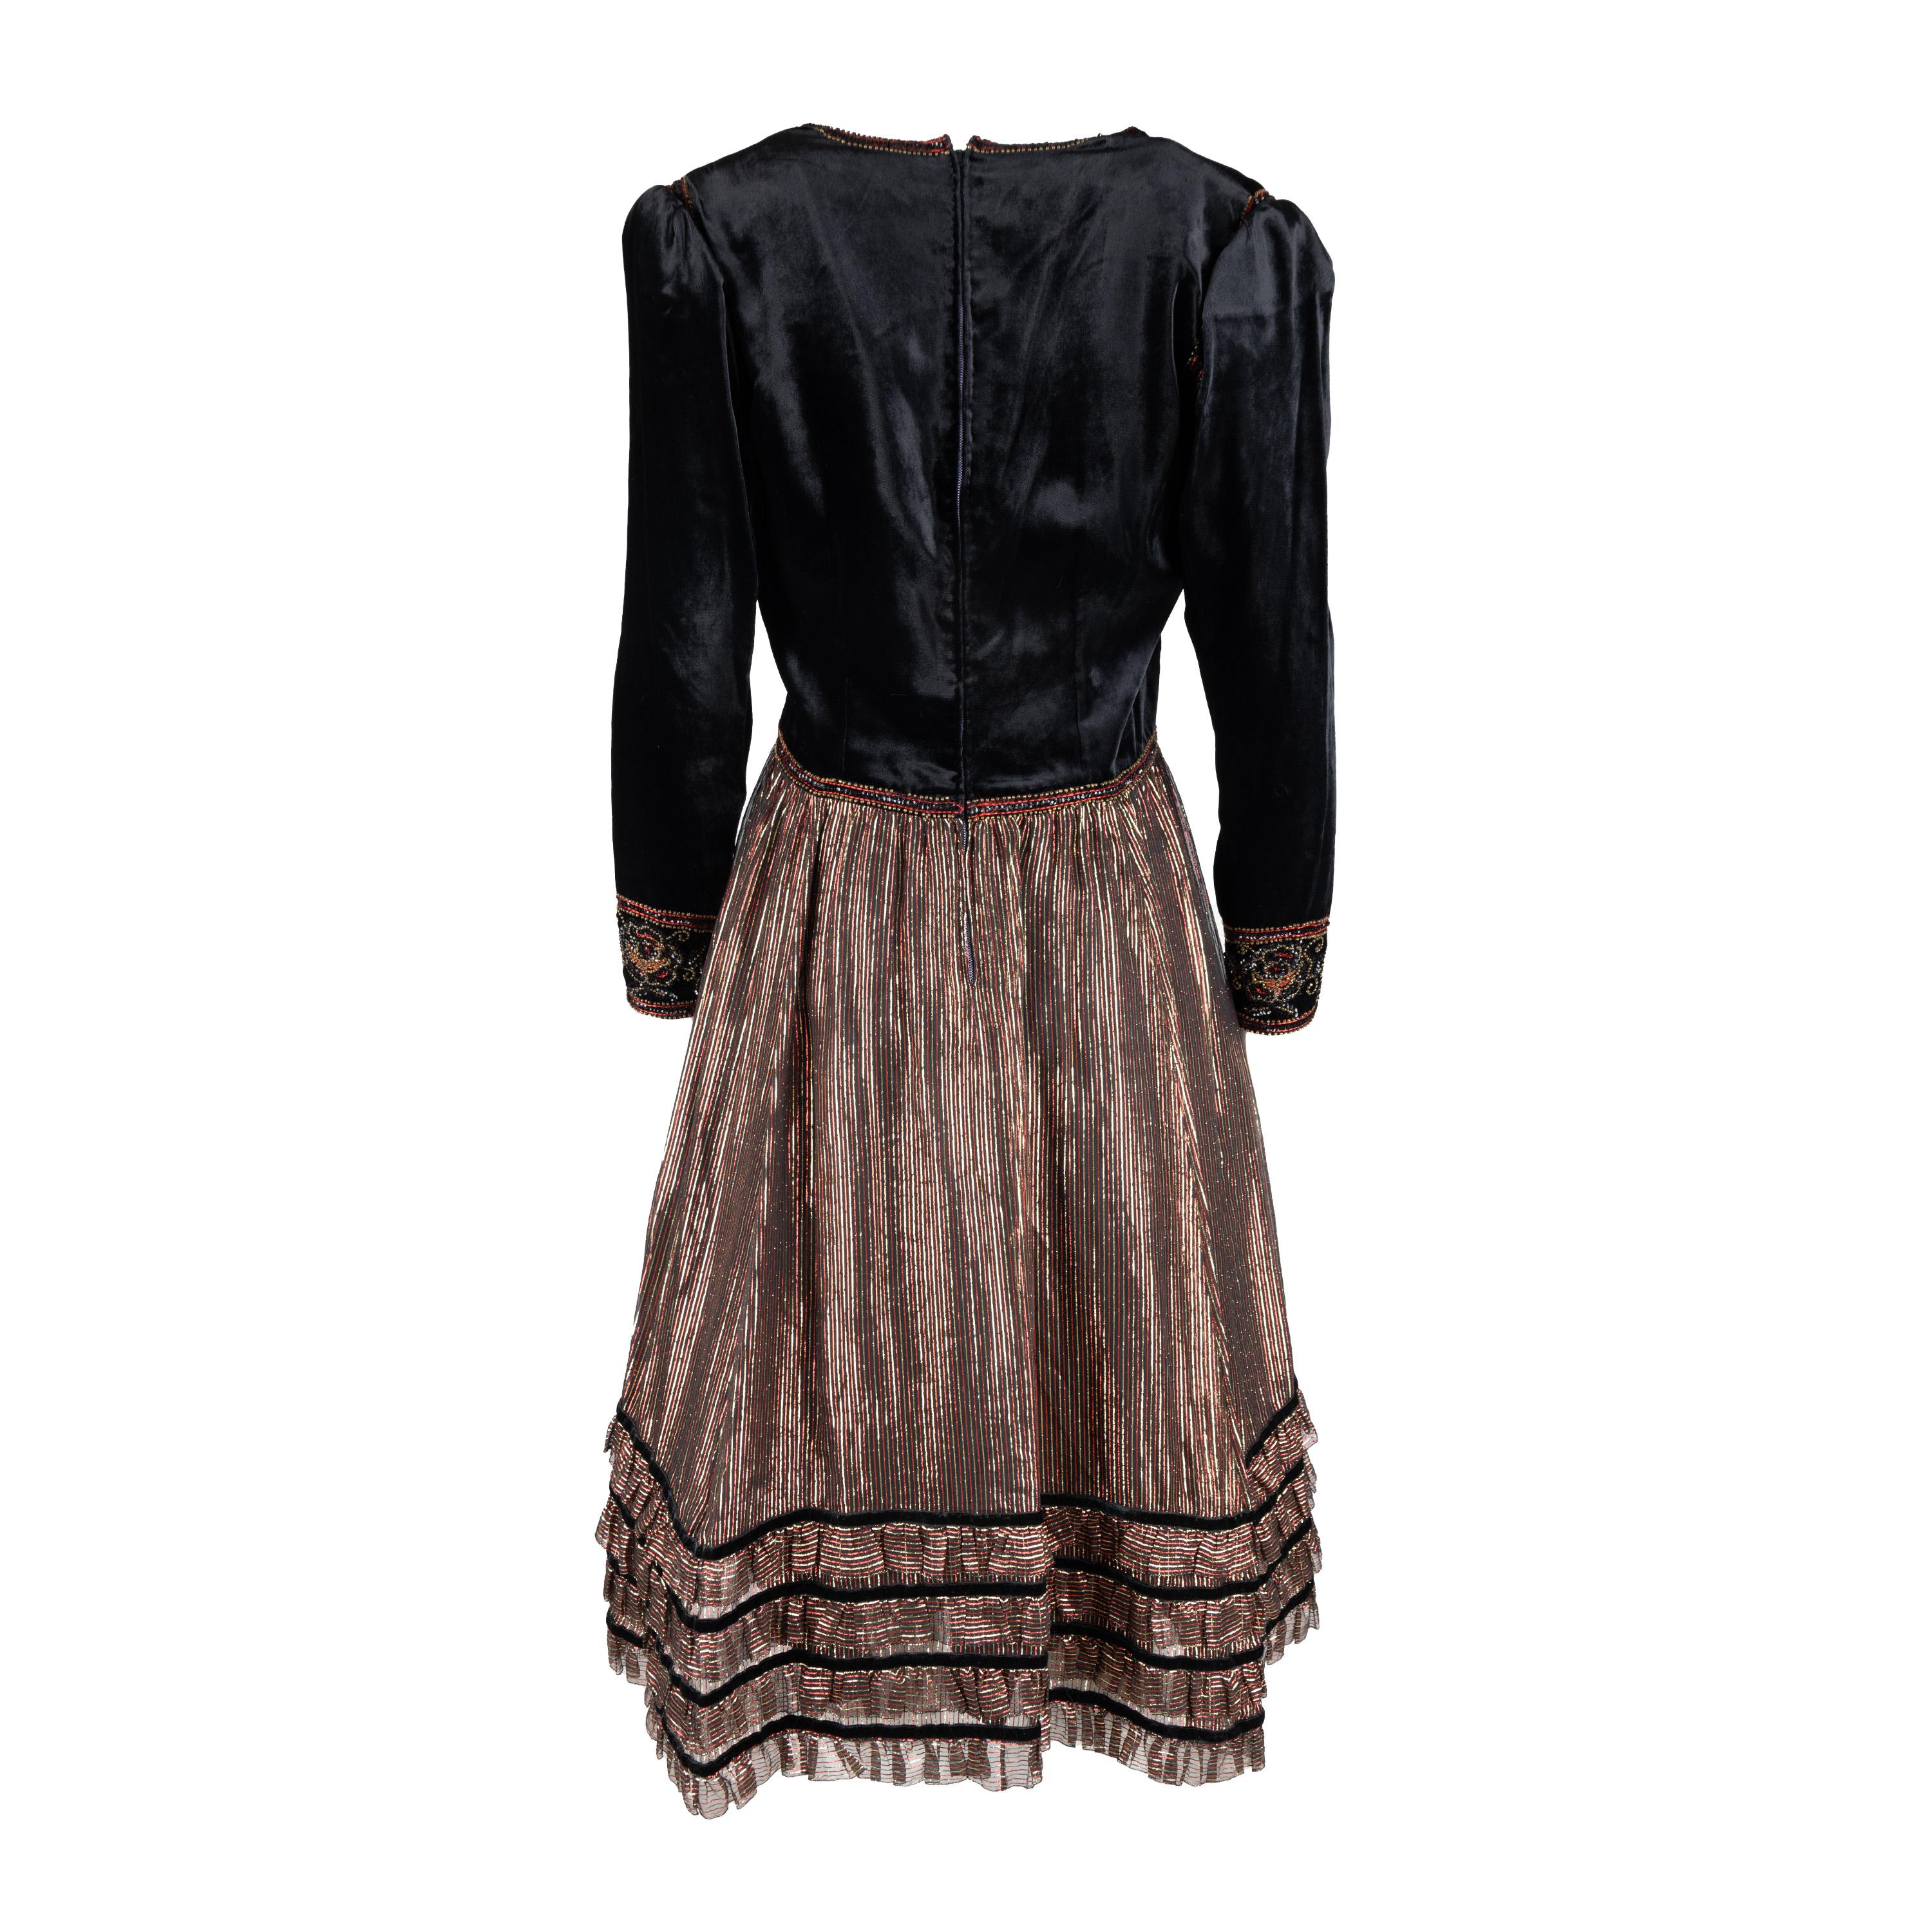 This vintage-style dress from Lancetti is sure to make you feel like the belle of the ball. Crafted using a combination of black velvet and sheer shimmer fabric, it is embellished with multicolor beads, sequins and threads. Its full sleeve and round